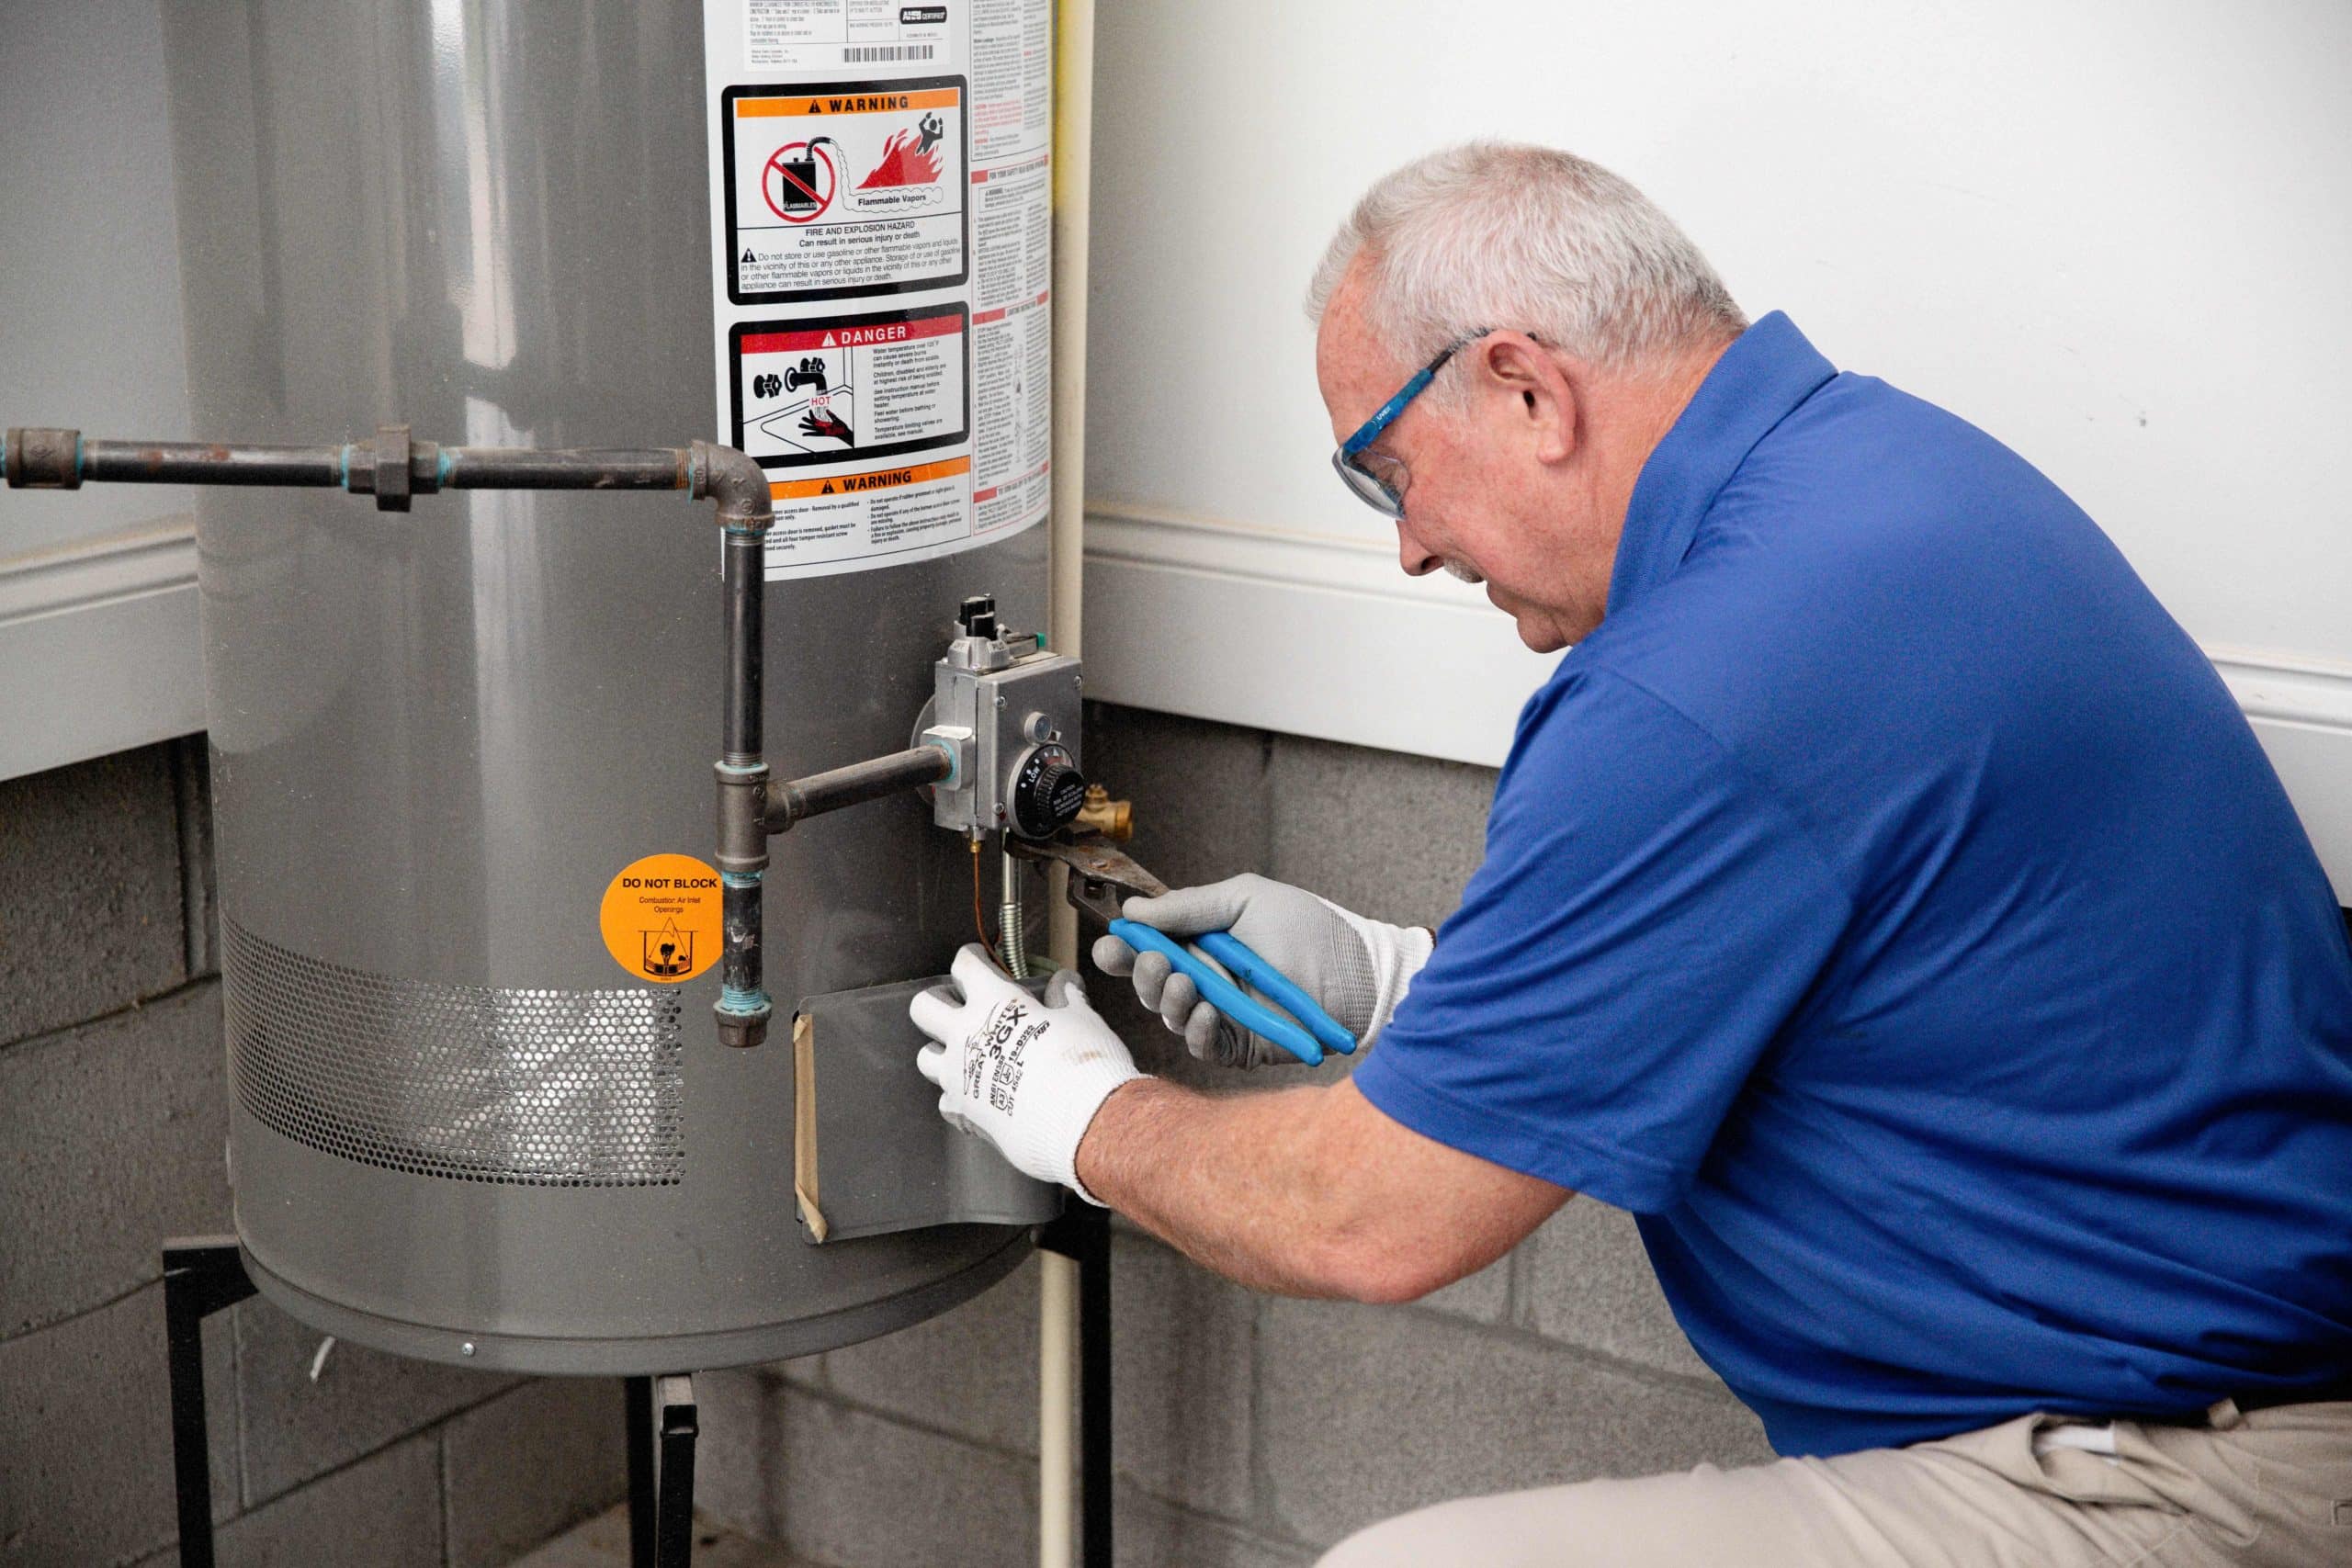 How To Extend Water Heater Life Expectancy? Lee Company